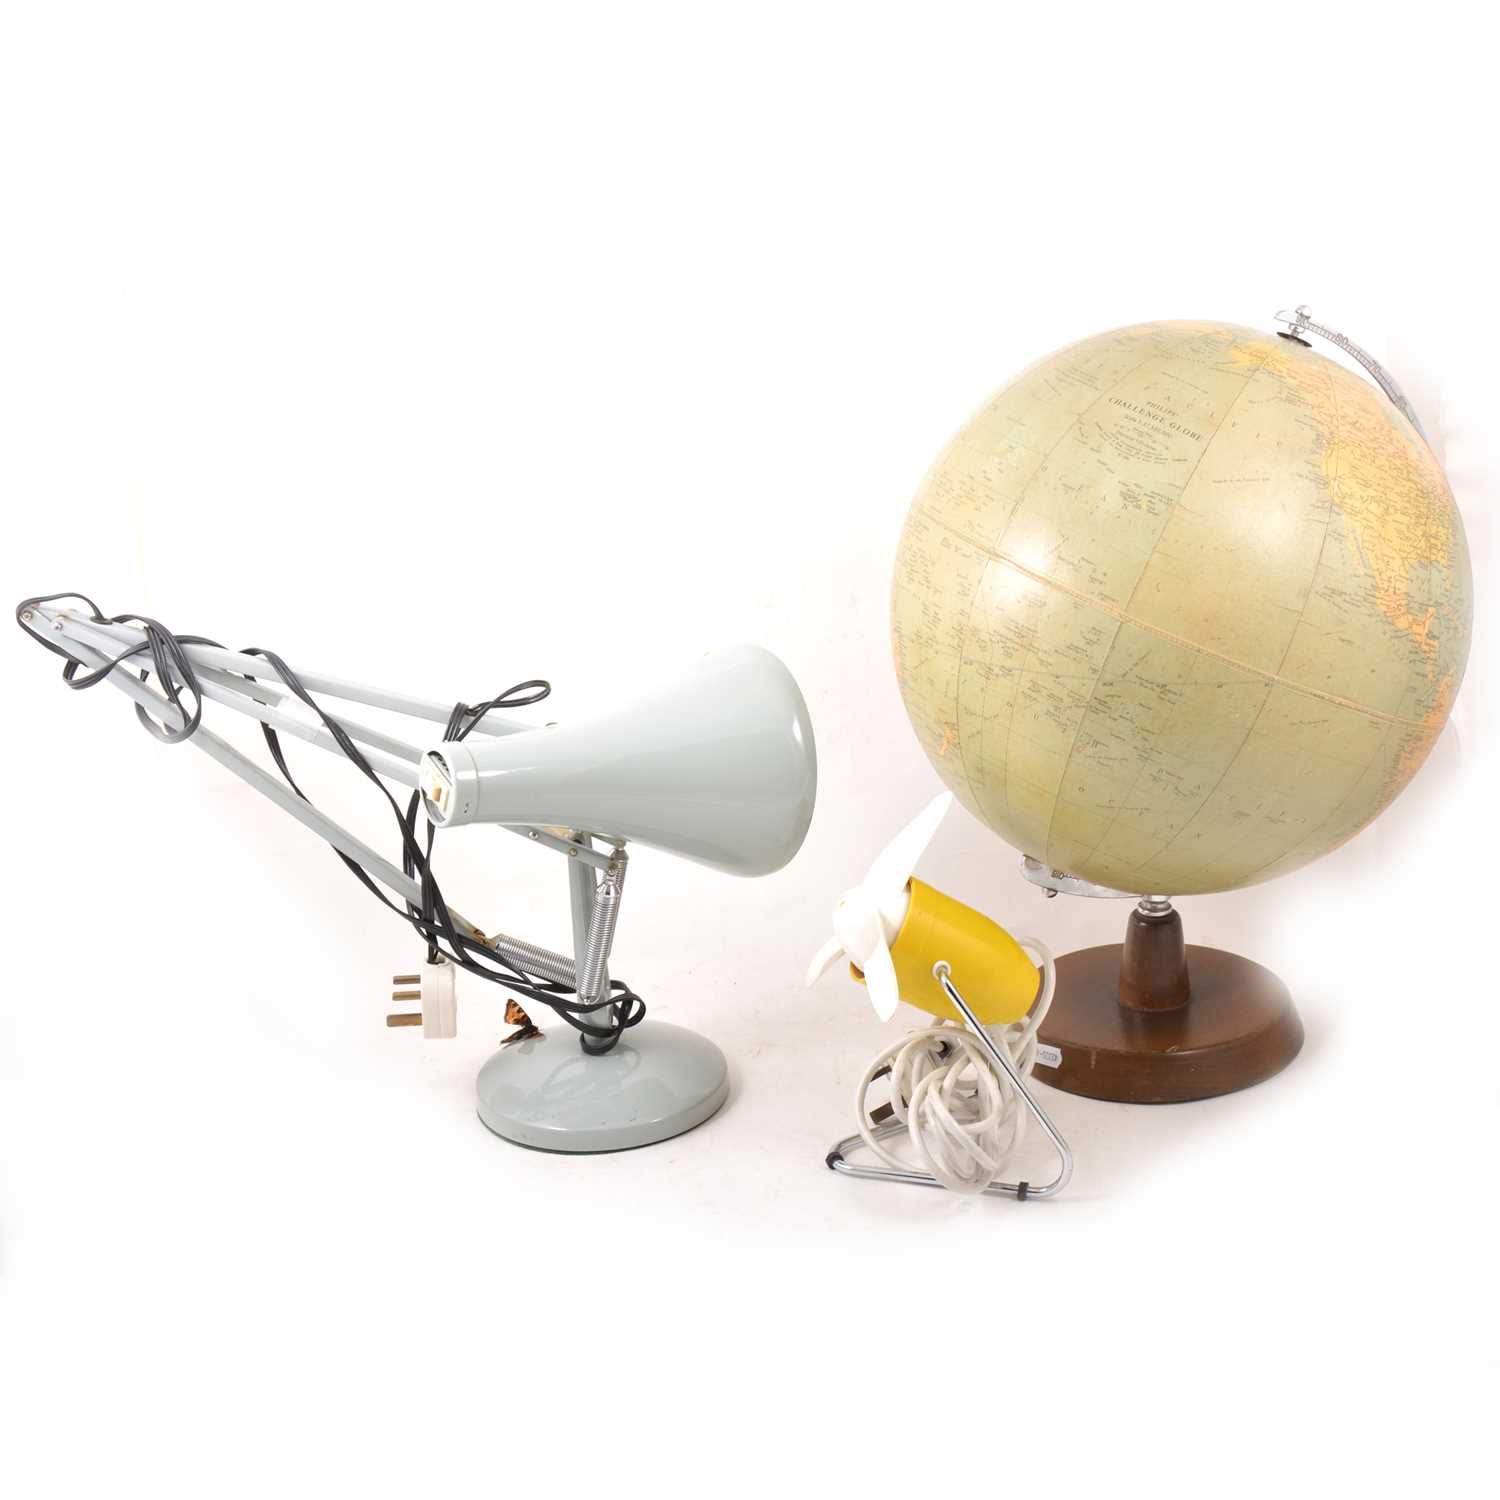 Lot 160 - An anglepoise lamp, a vintage electric fan and a Philip's Challenge Globe.